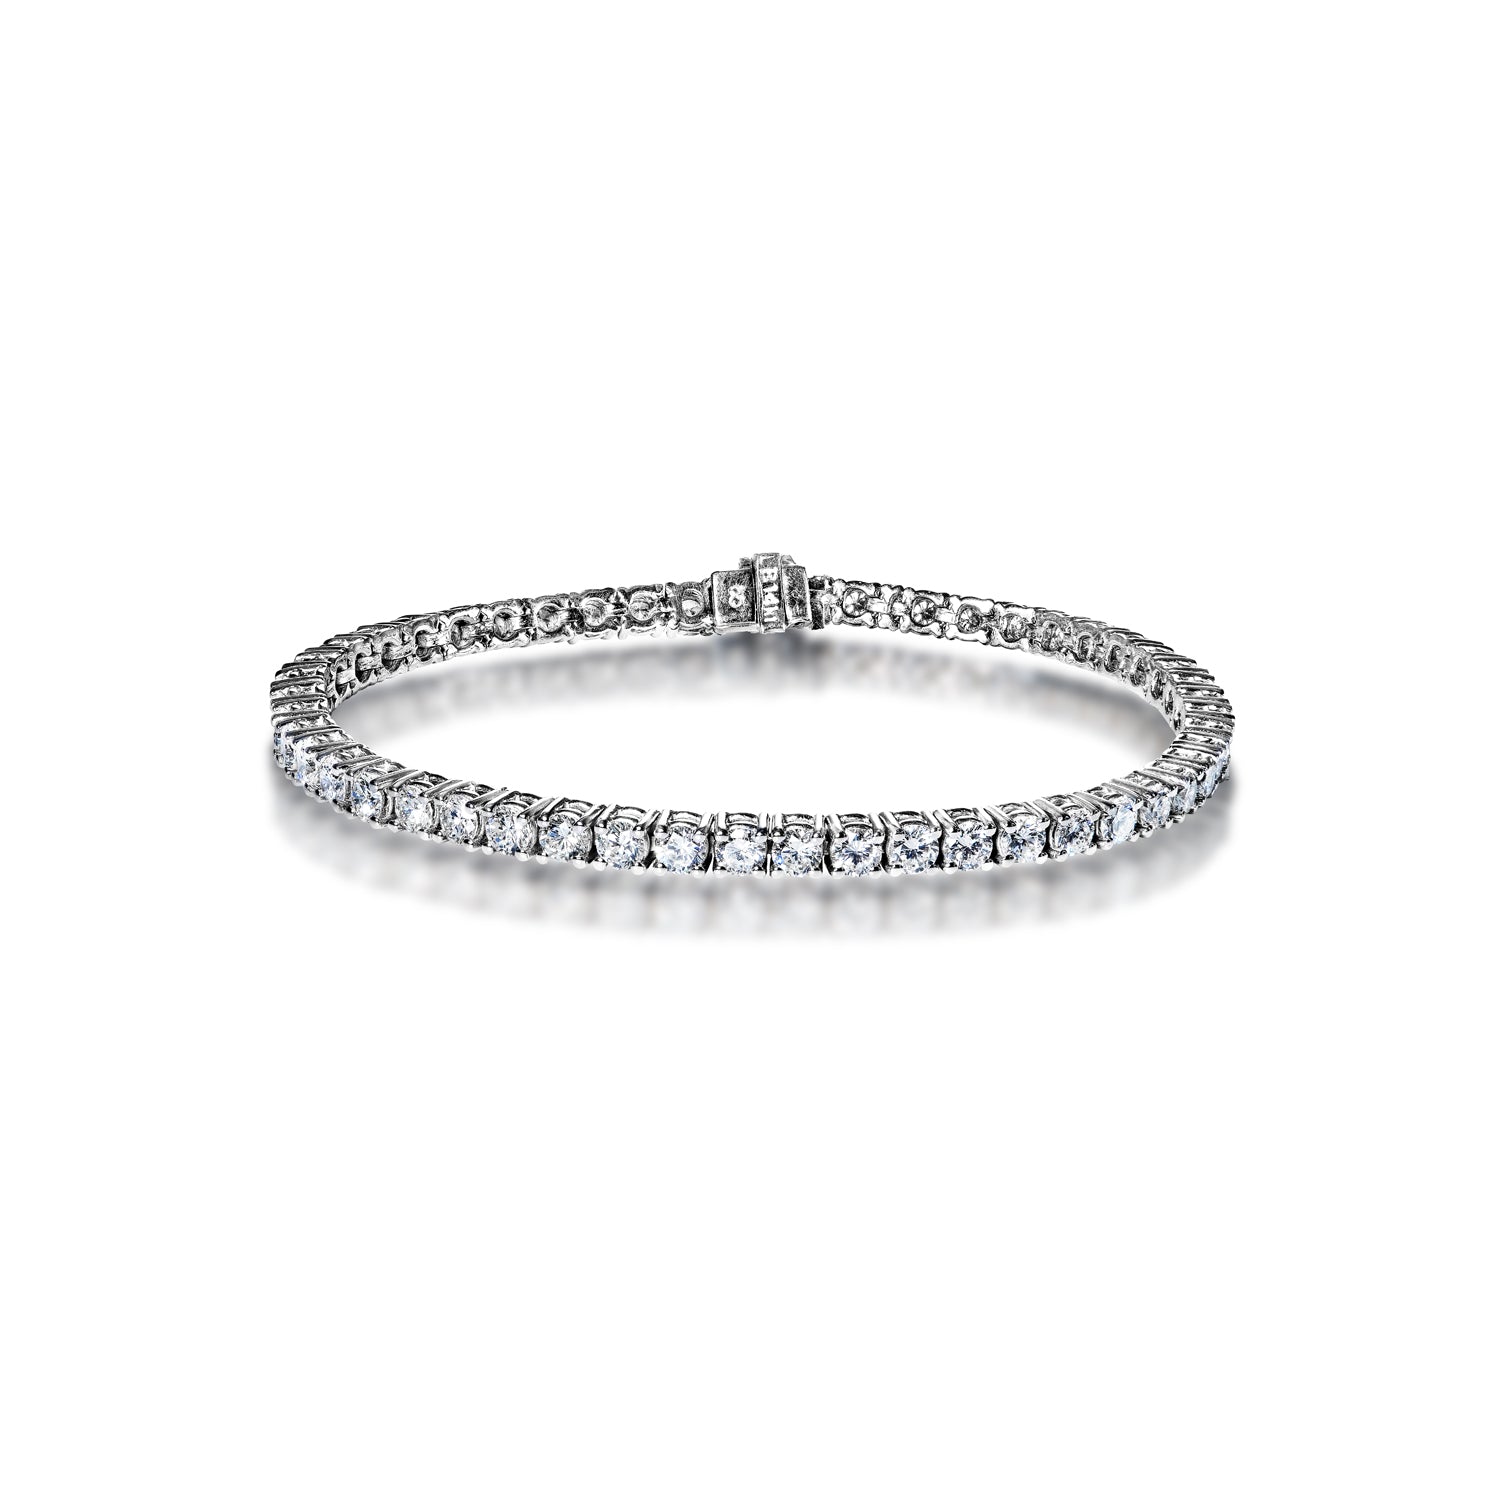 S925 Silver 4mm Moissanite Single Row Diamond Bracelet Female Support on  Behalf of the Delivery - AliExpress